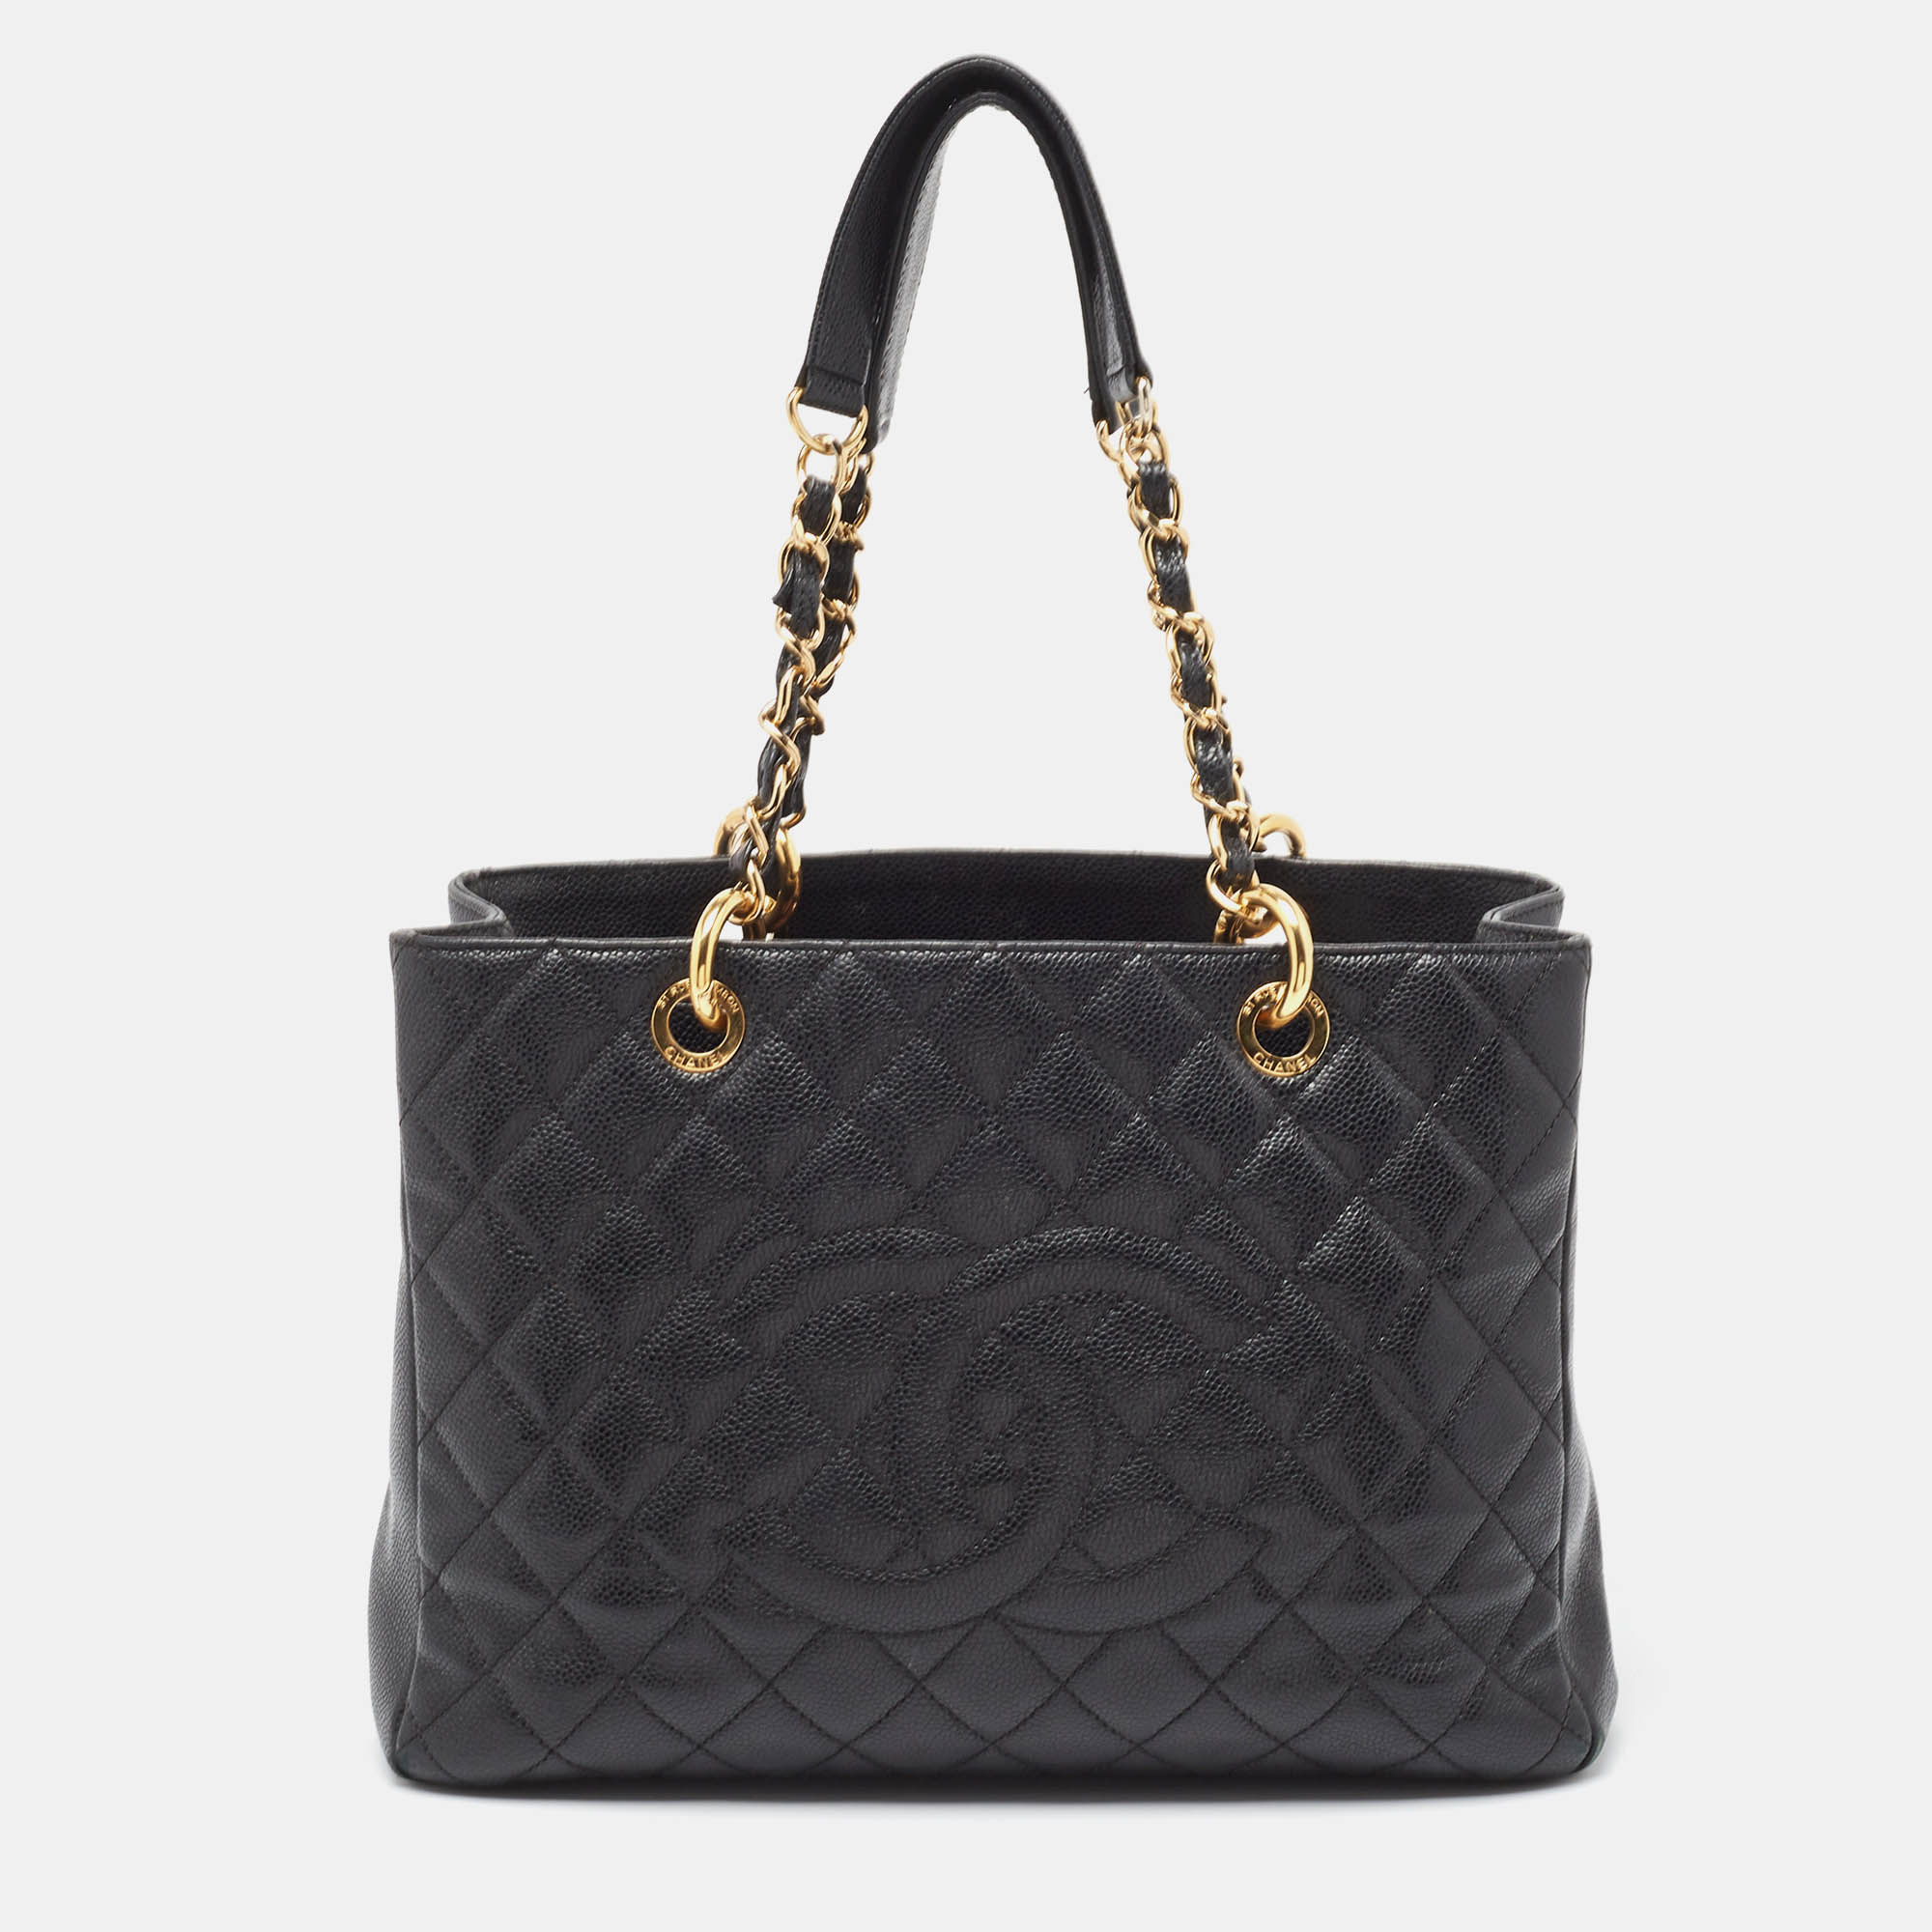 Chanel black quilted caviar leather gst shopper tote